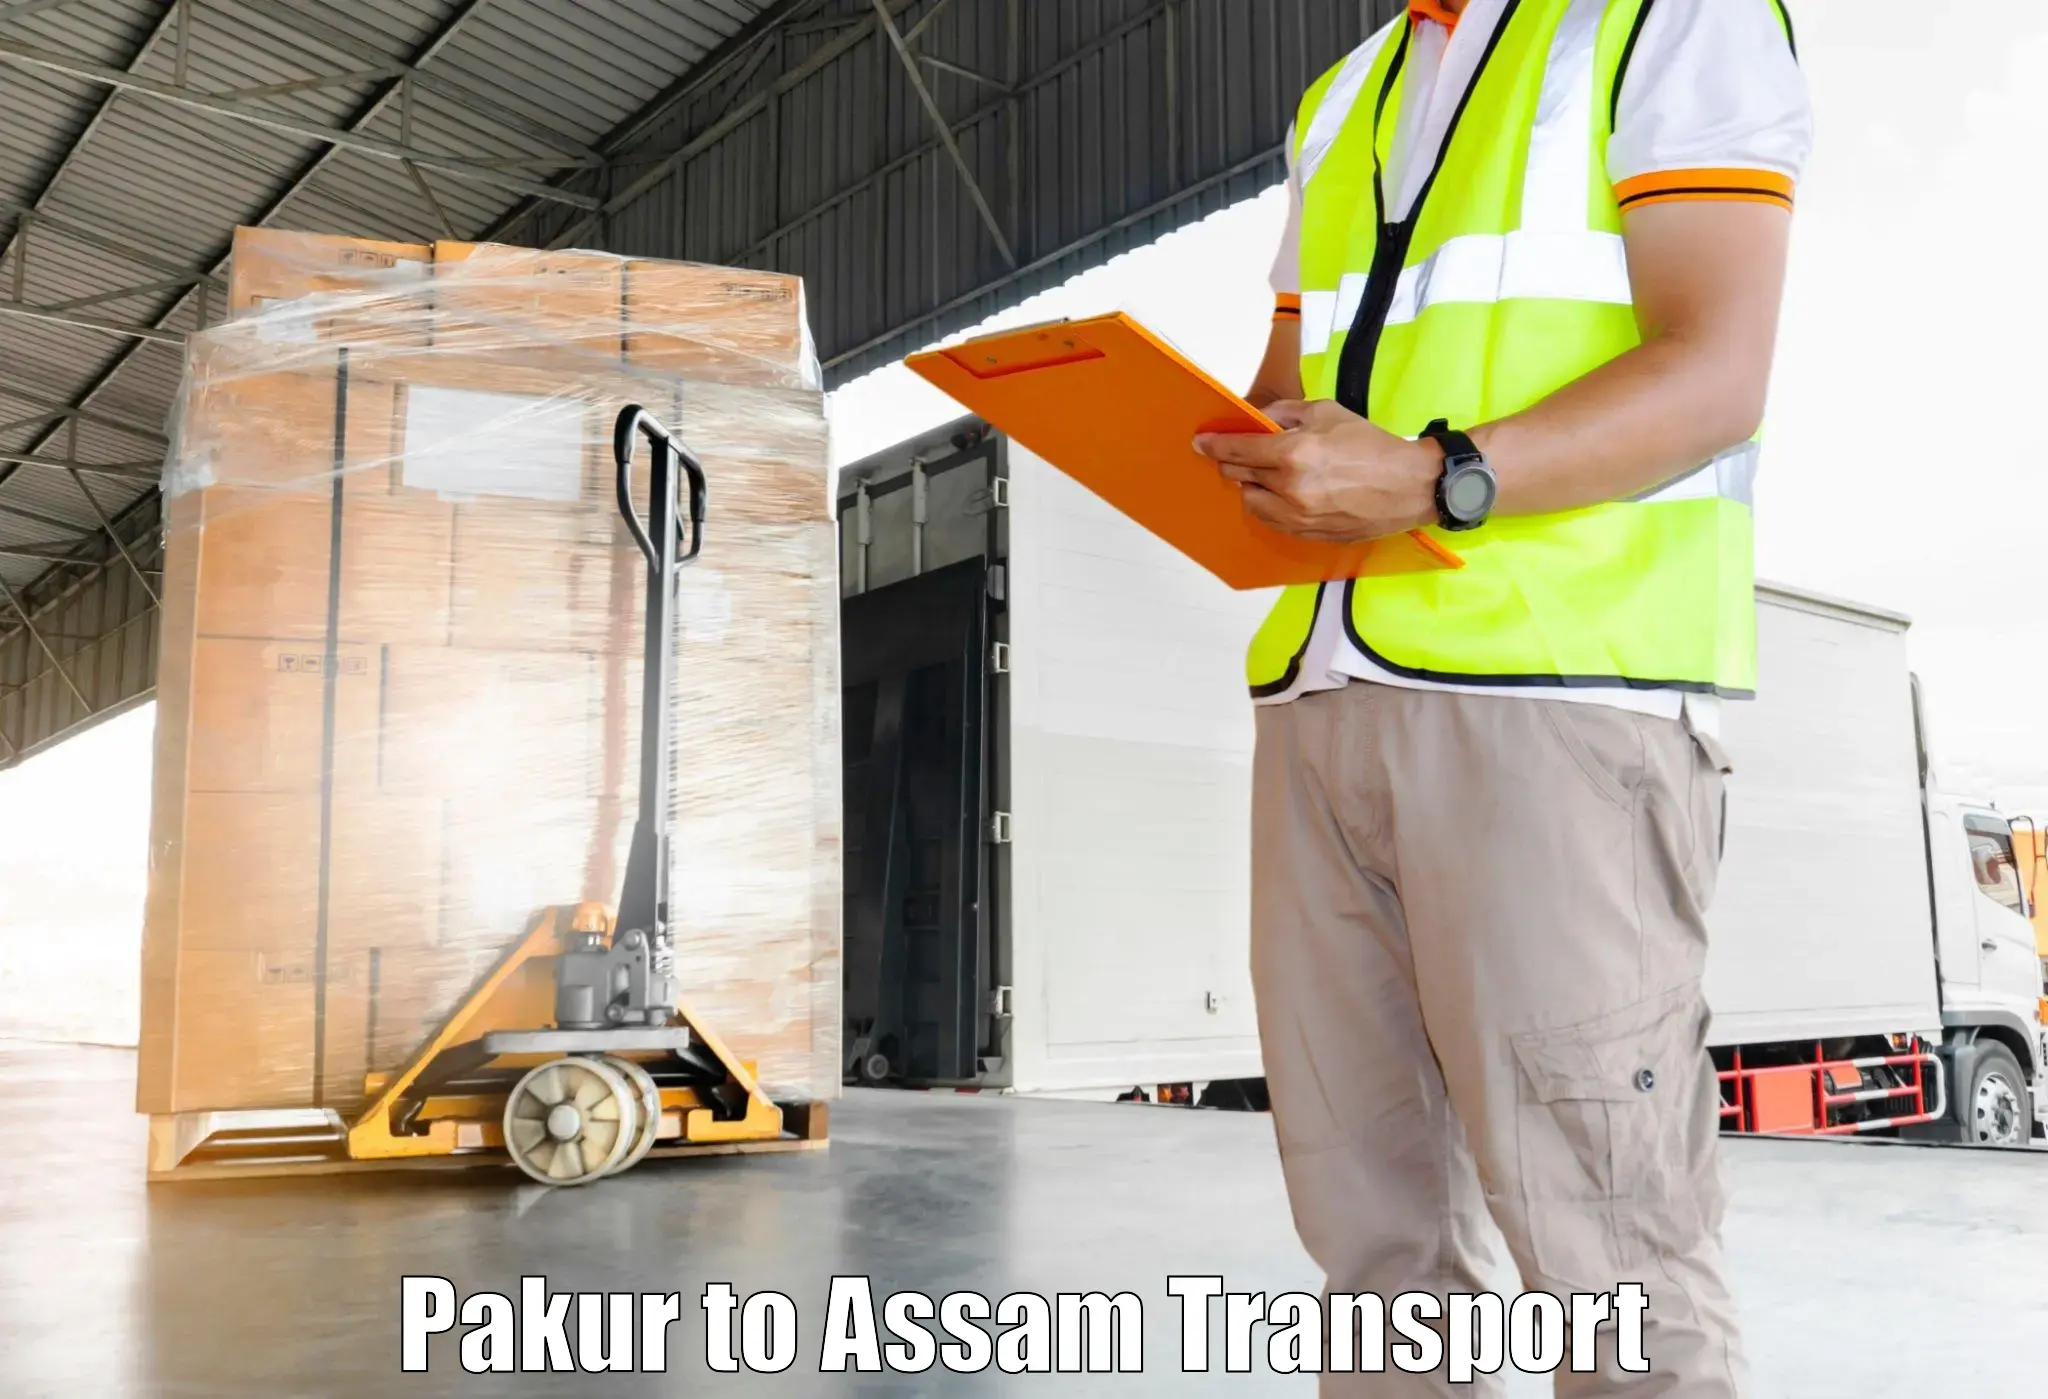 Delivery service Pakur to Assam